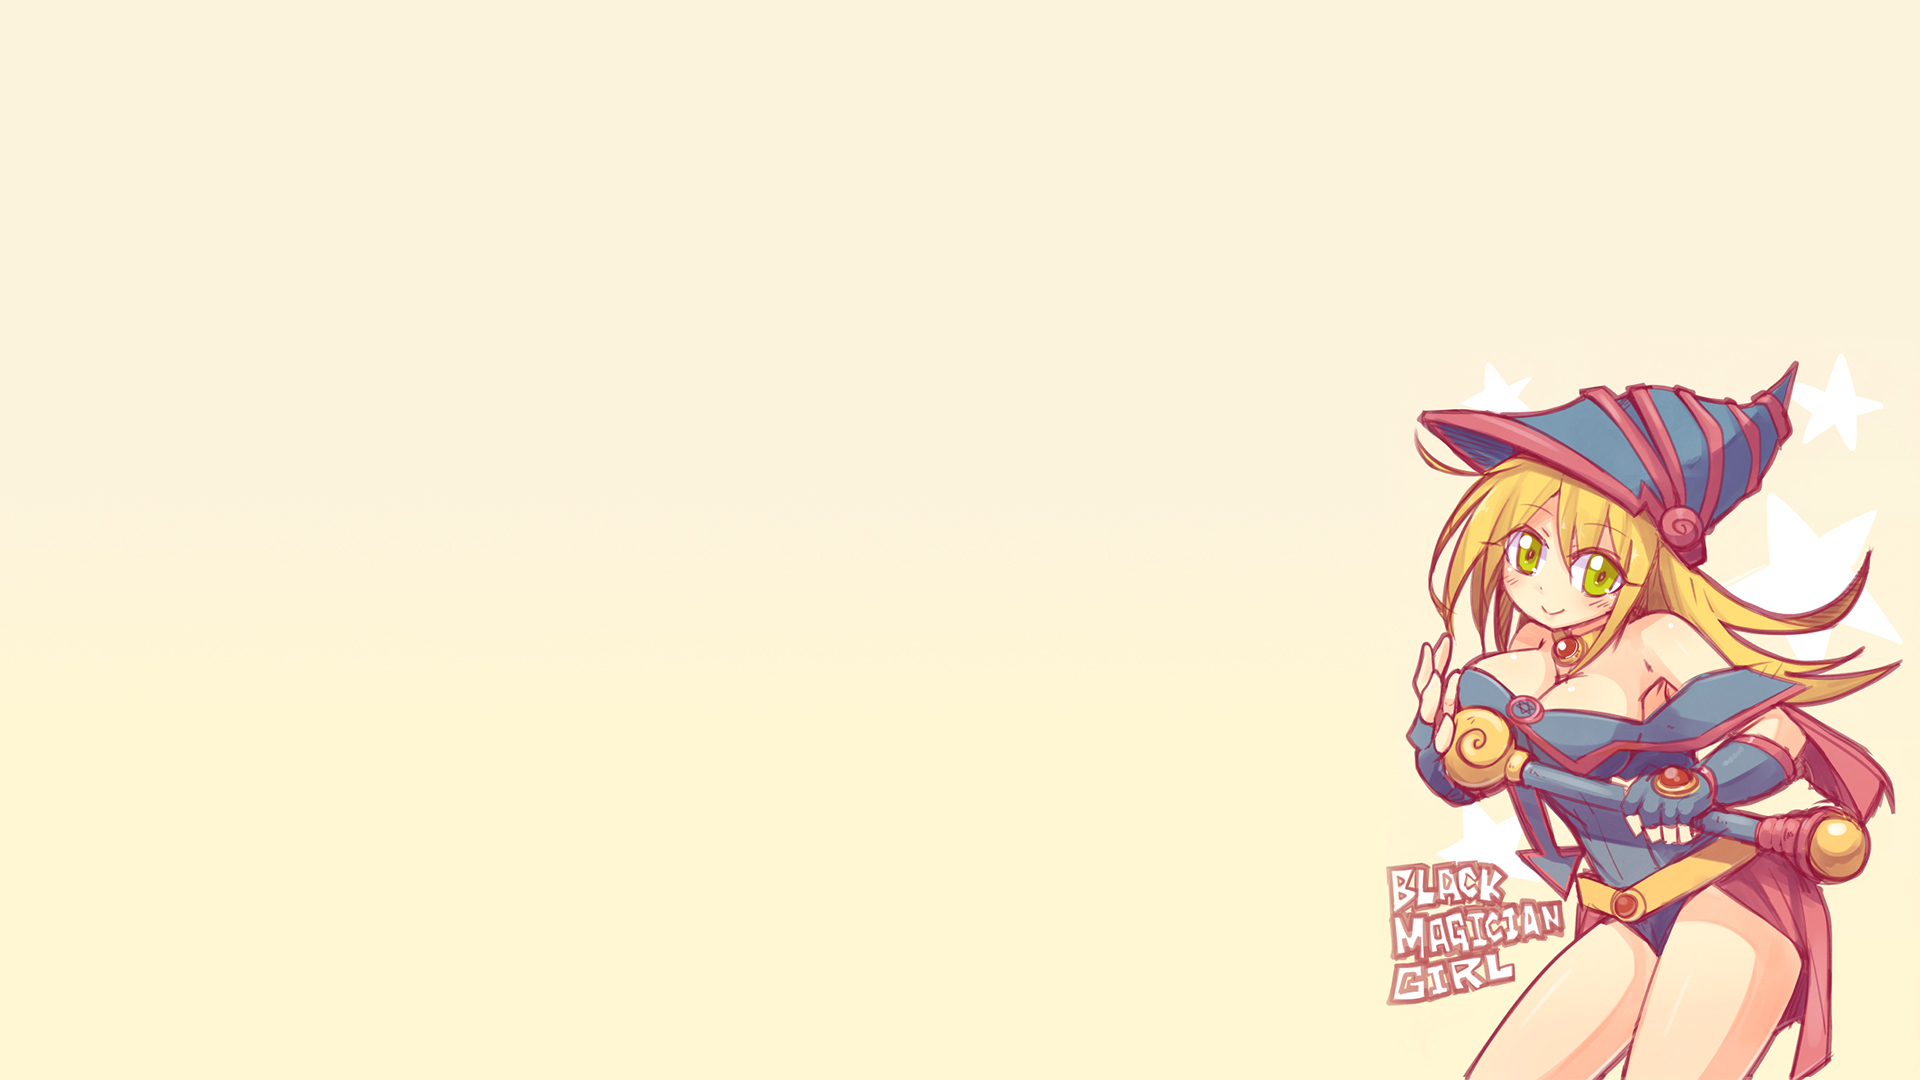 Lovely Dark Magician Girl Card Background - wallpaper quotes